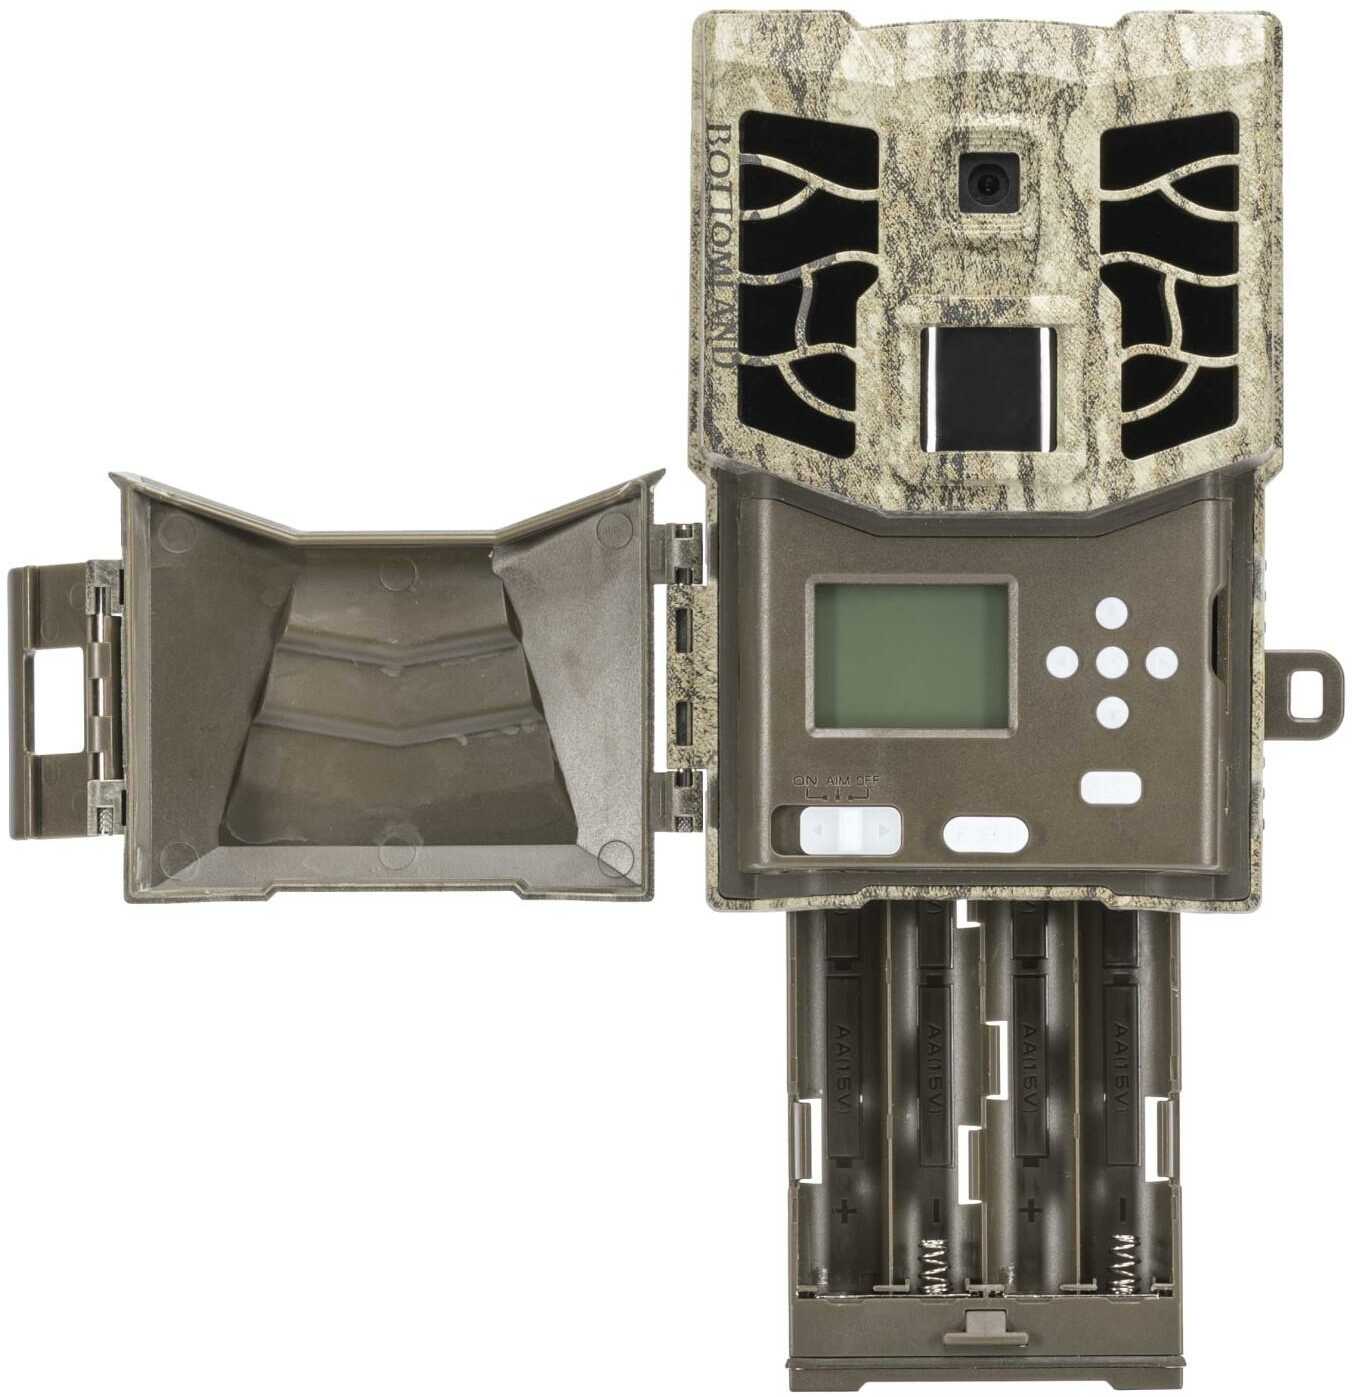 Covert Scouting Cameras CC8021 MP32 Mossy Oak Bottomlands 1.50" Display 32 Resolution 100 Flash Sd Card Slot/Up To